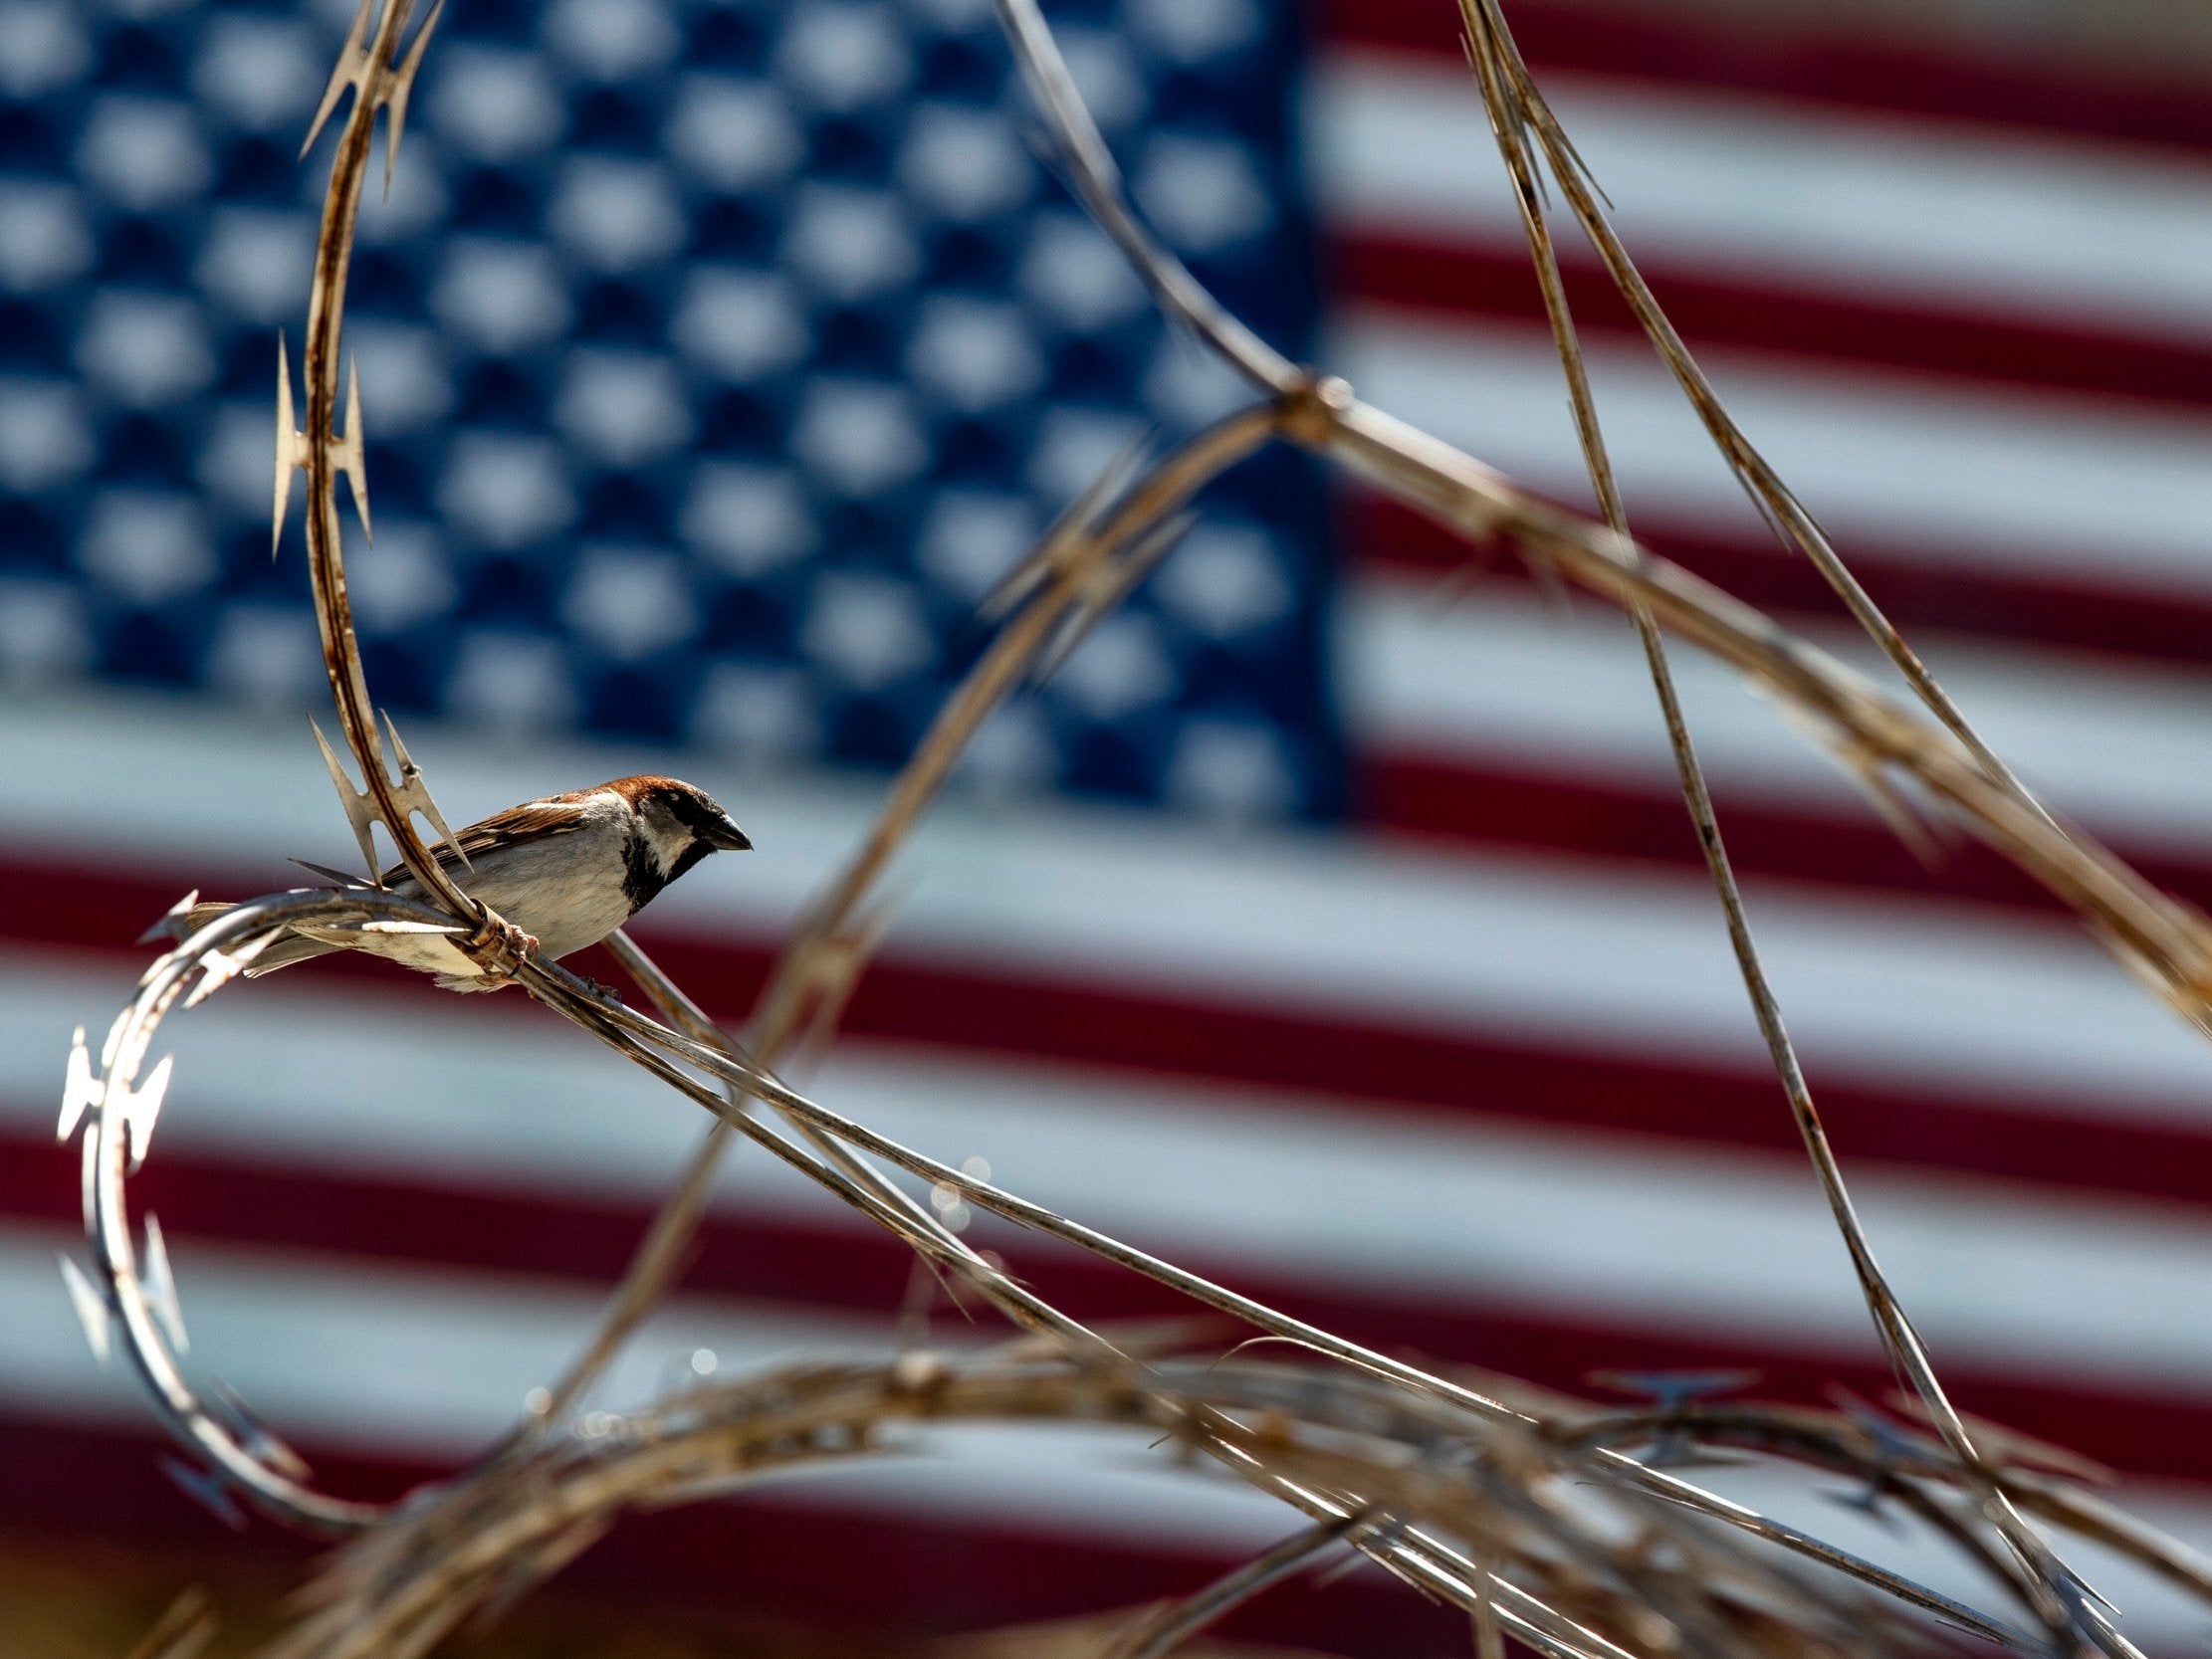 In this photo reviewed by US military officials, a sparrow sits on razor wire at the Camp VI detention facility in Guantanamo Bay Naval Base, Cuba